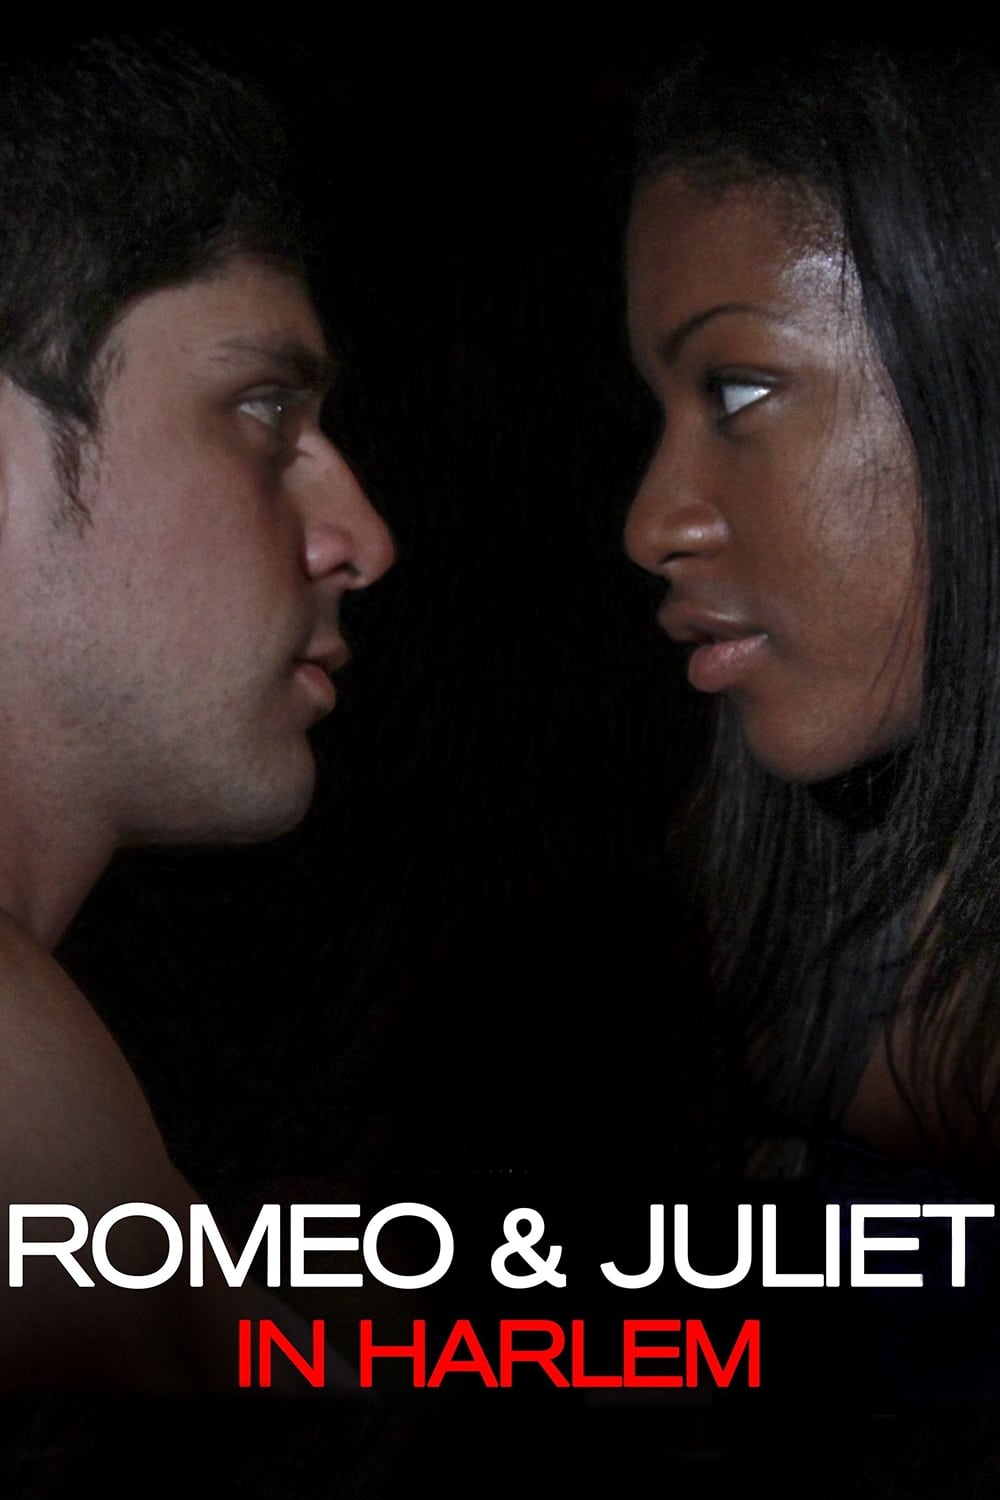 Romeo and Juliet in Harlem